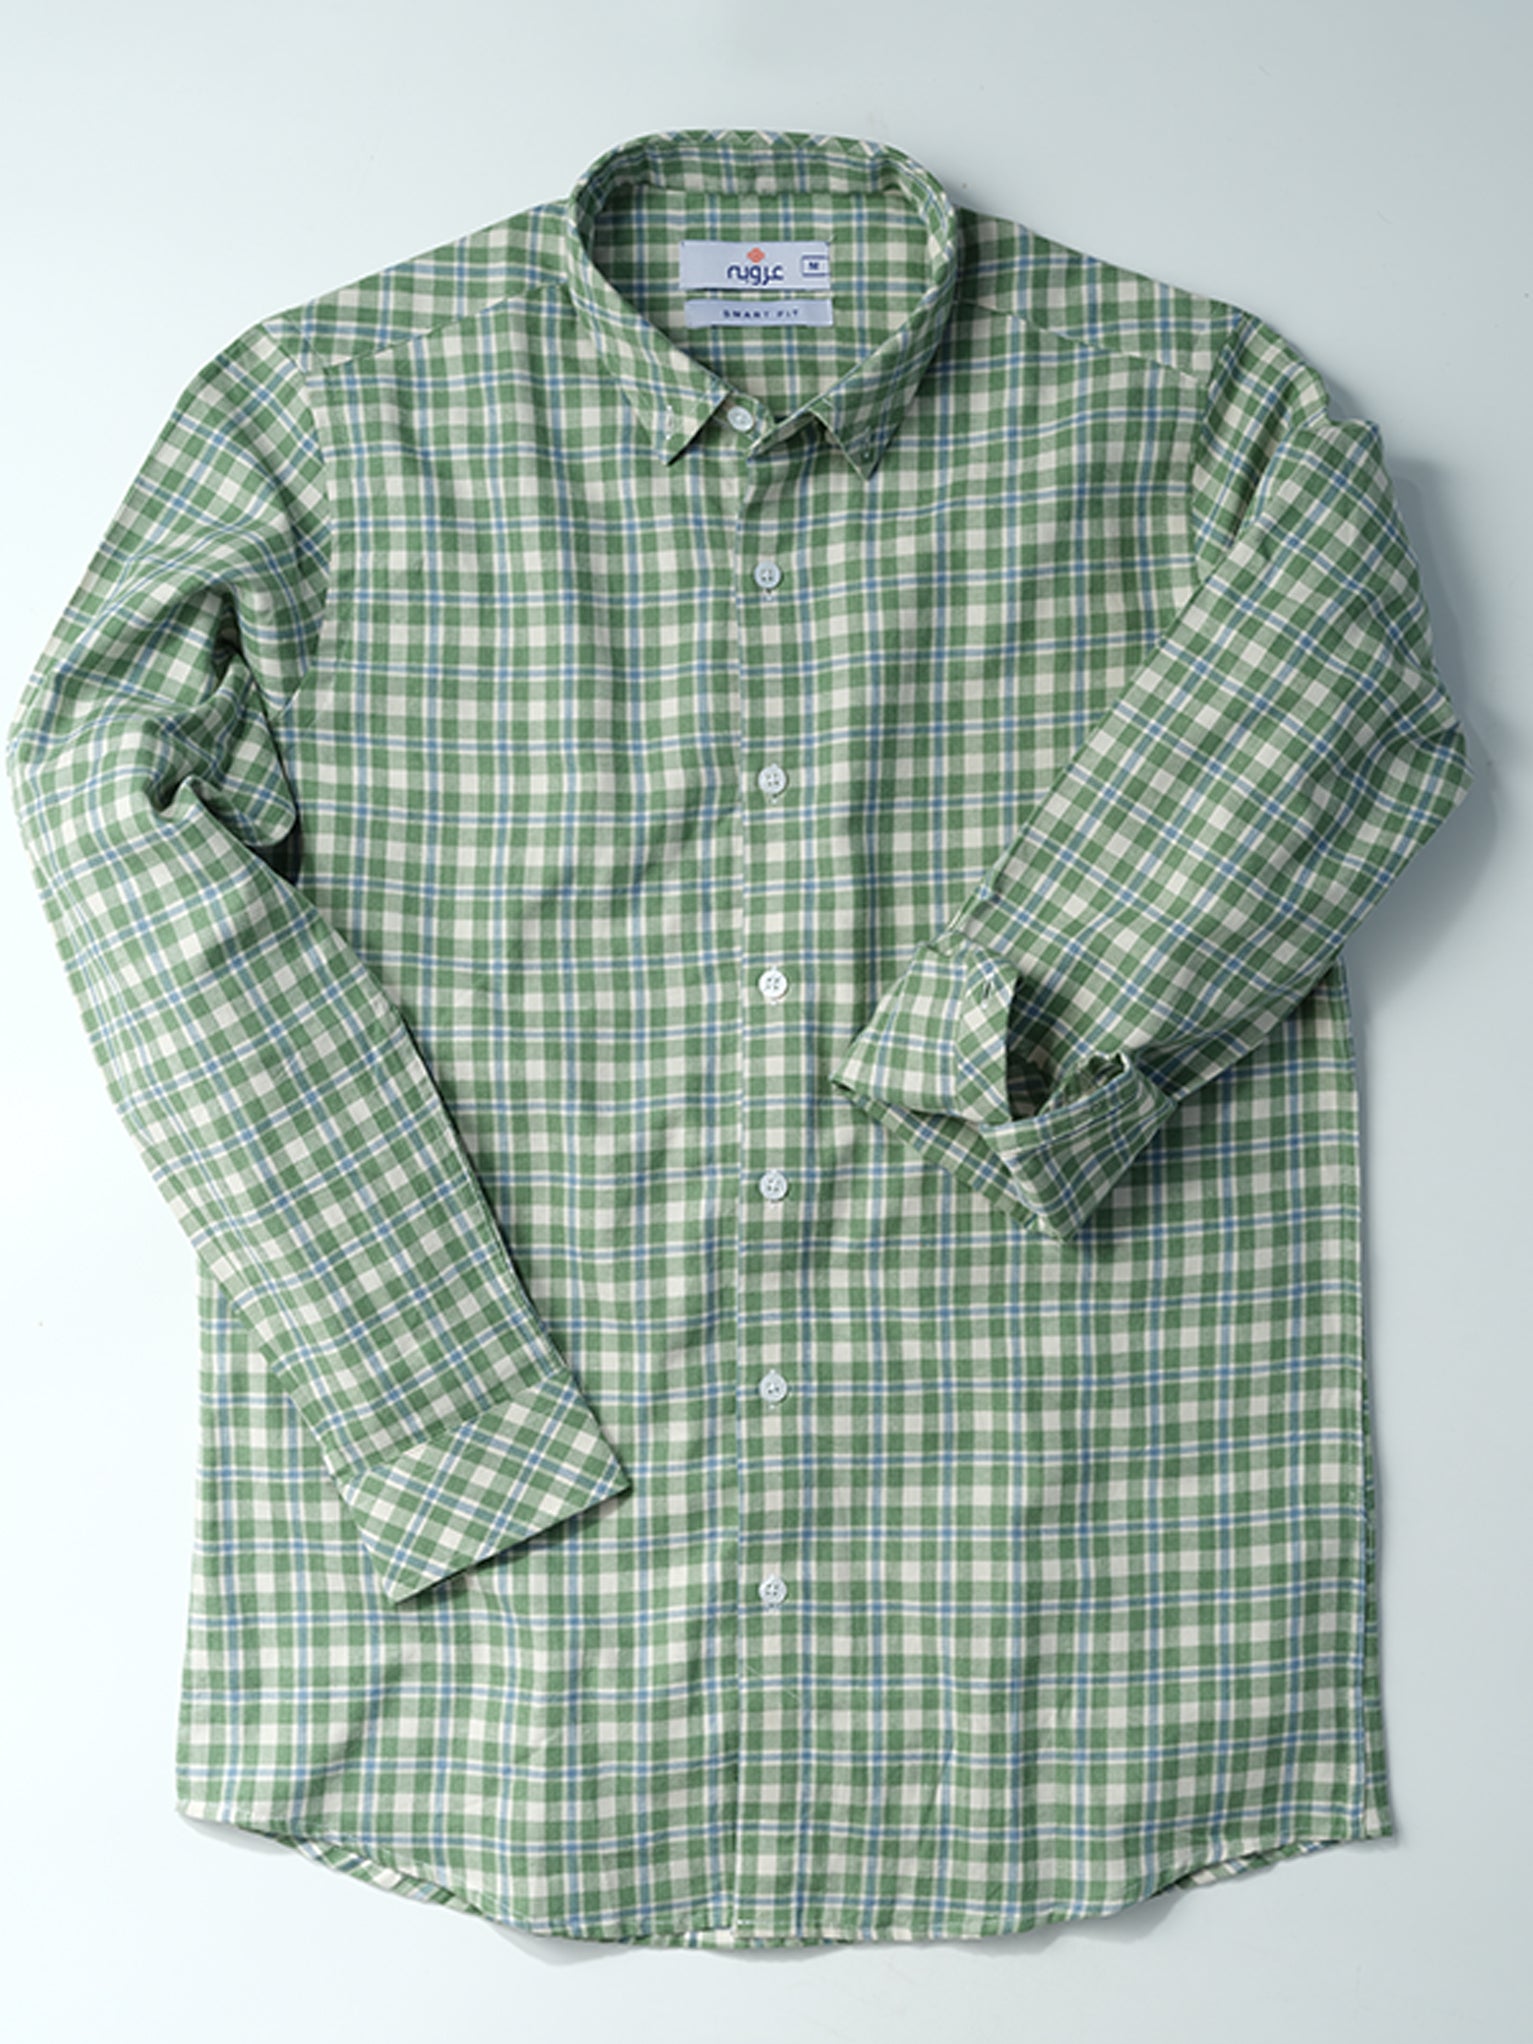 GREEN AND WHITE GINGHAM CEHCK SHIRT FOR MEN 3